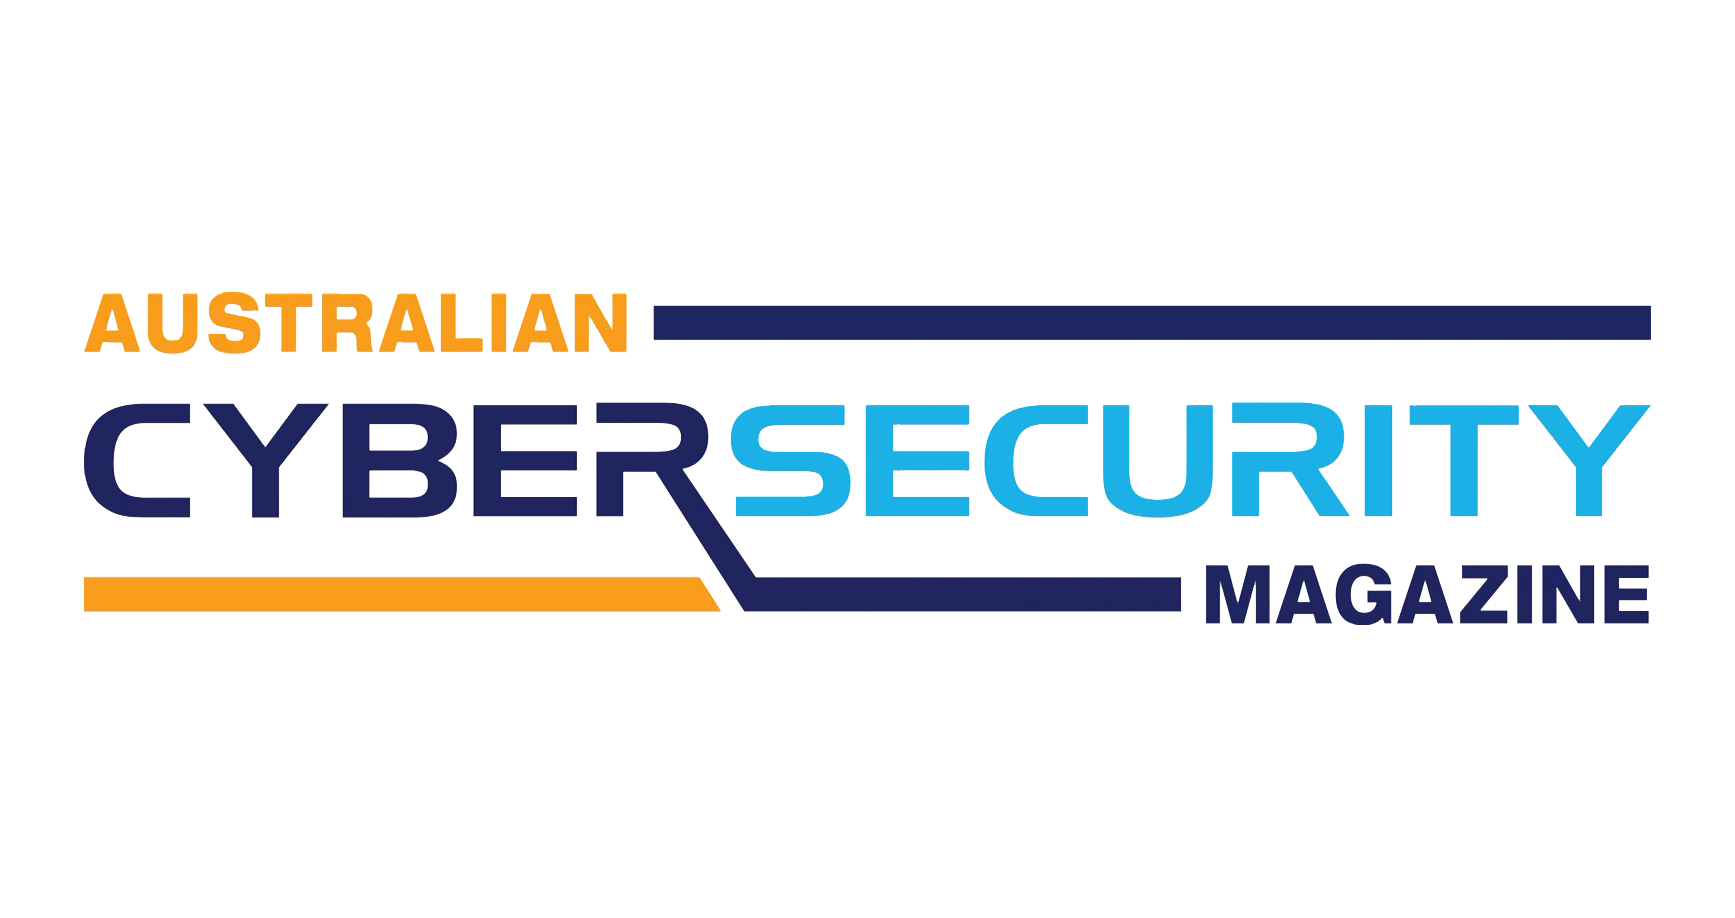 Australian Cyber Security Magazine rates 6clicks as the best cyber ISMS and GRC